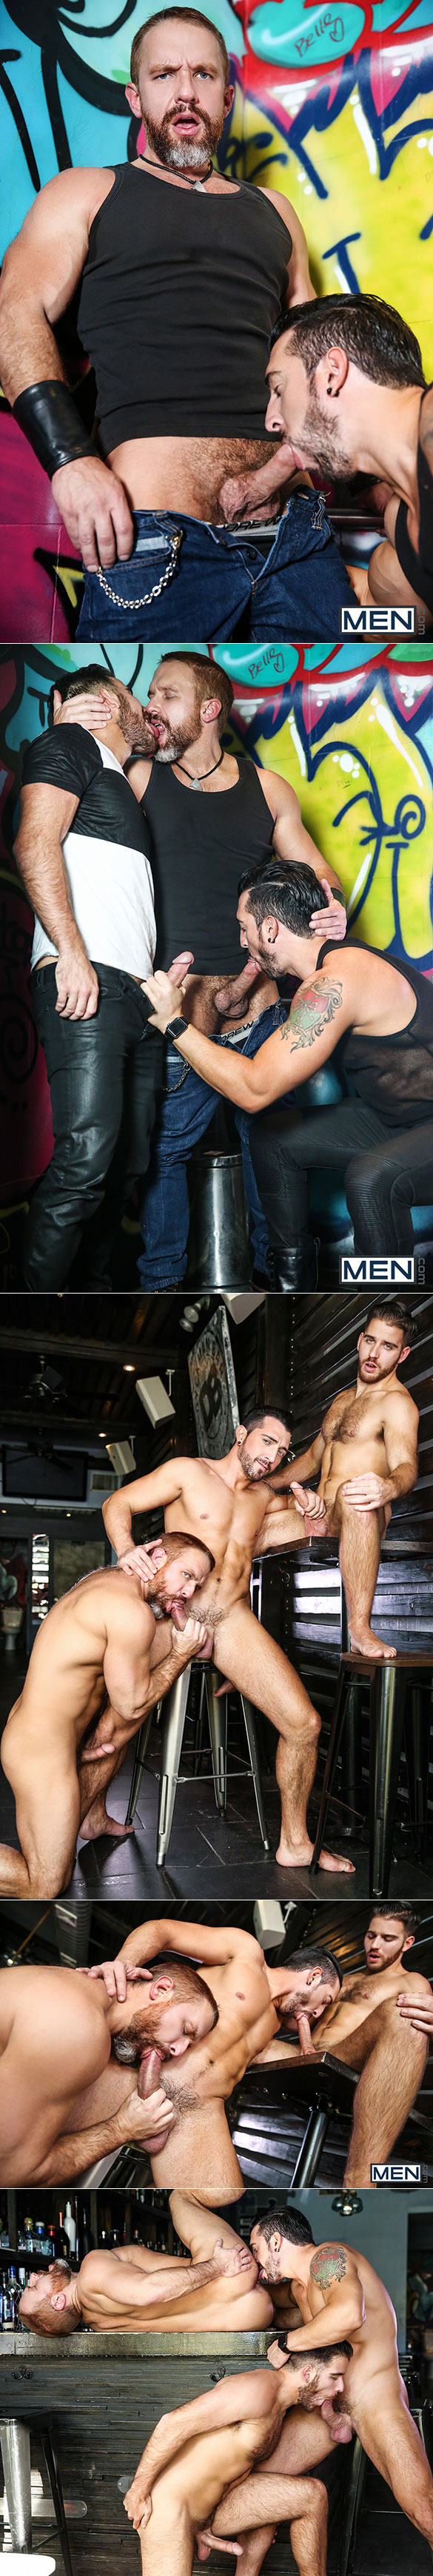 Men.com: Dirk Caber, Jimmy Durano and Jackson Grant's threeway in "Heartbreakers, Part 2"